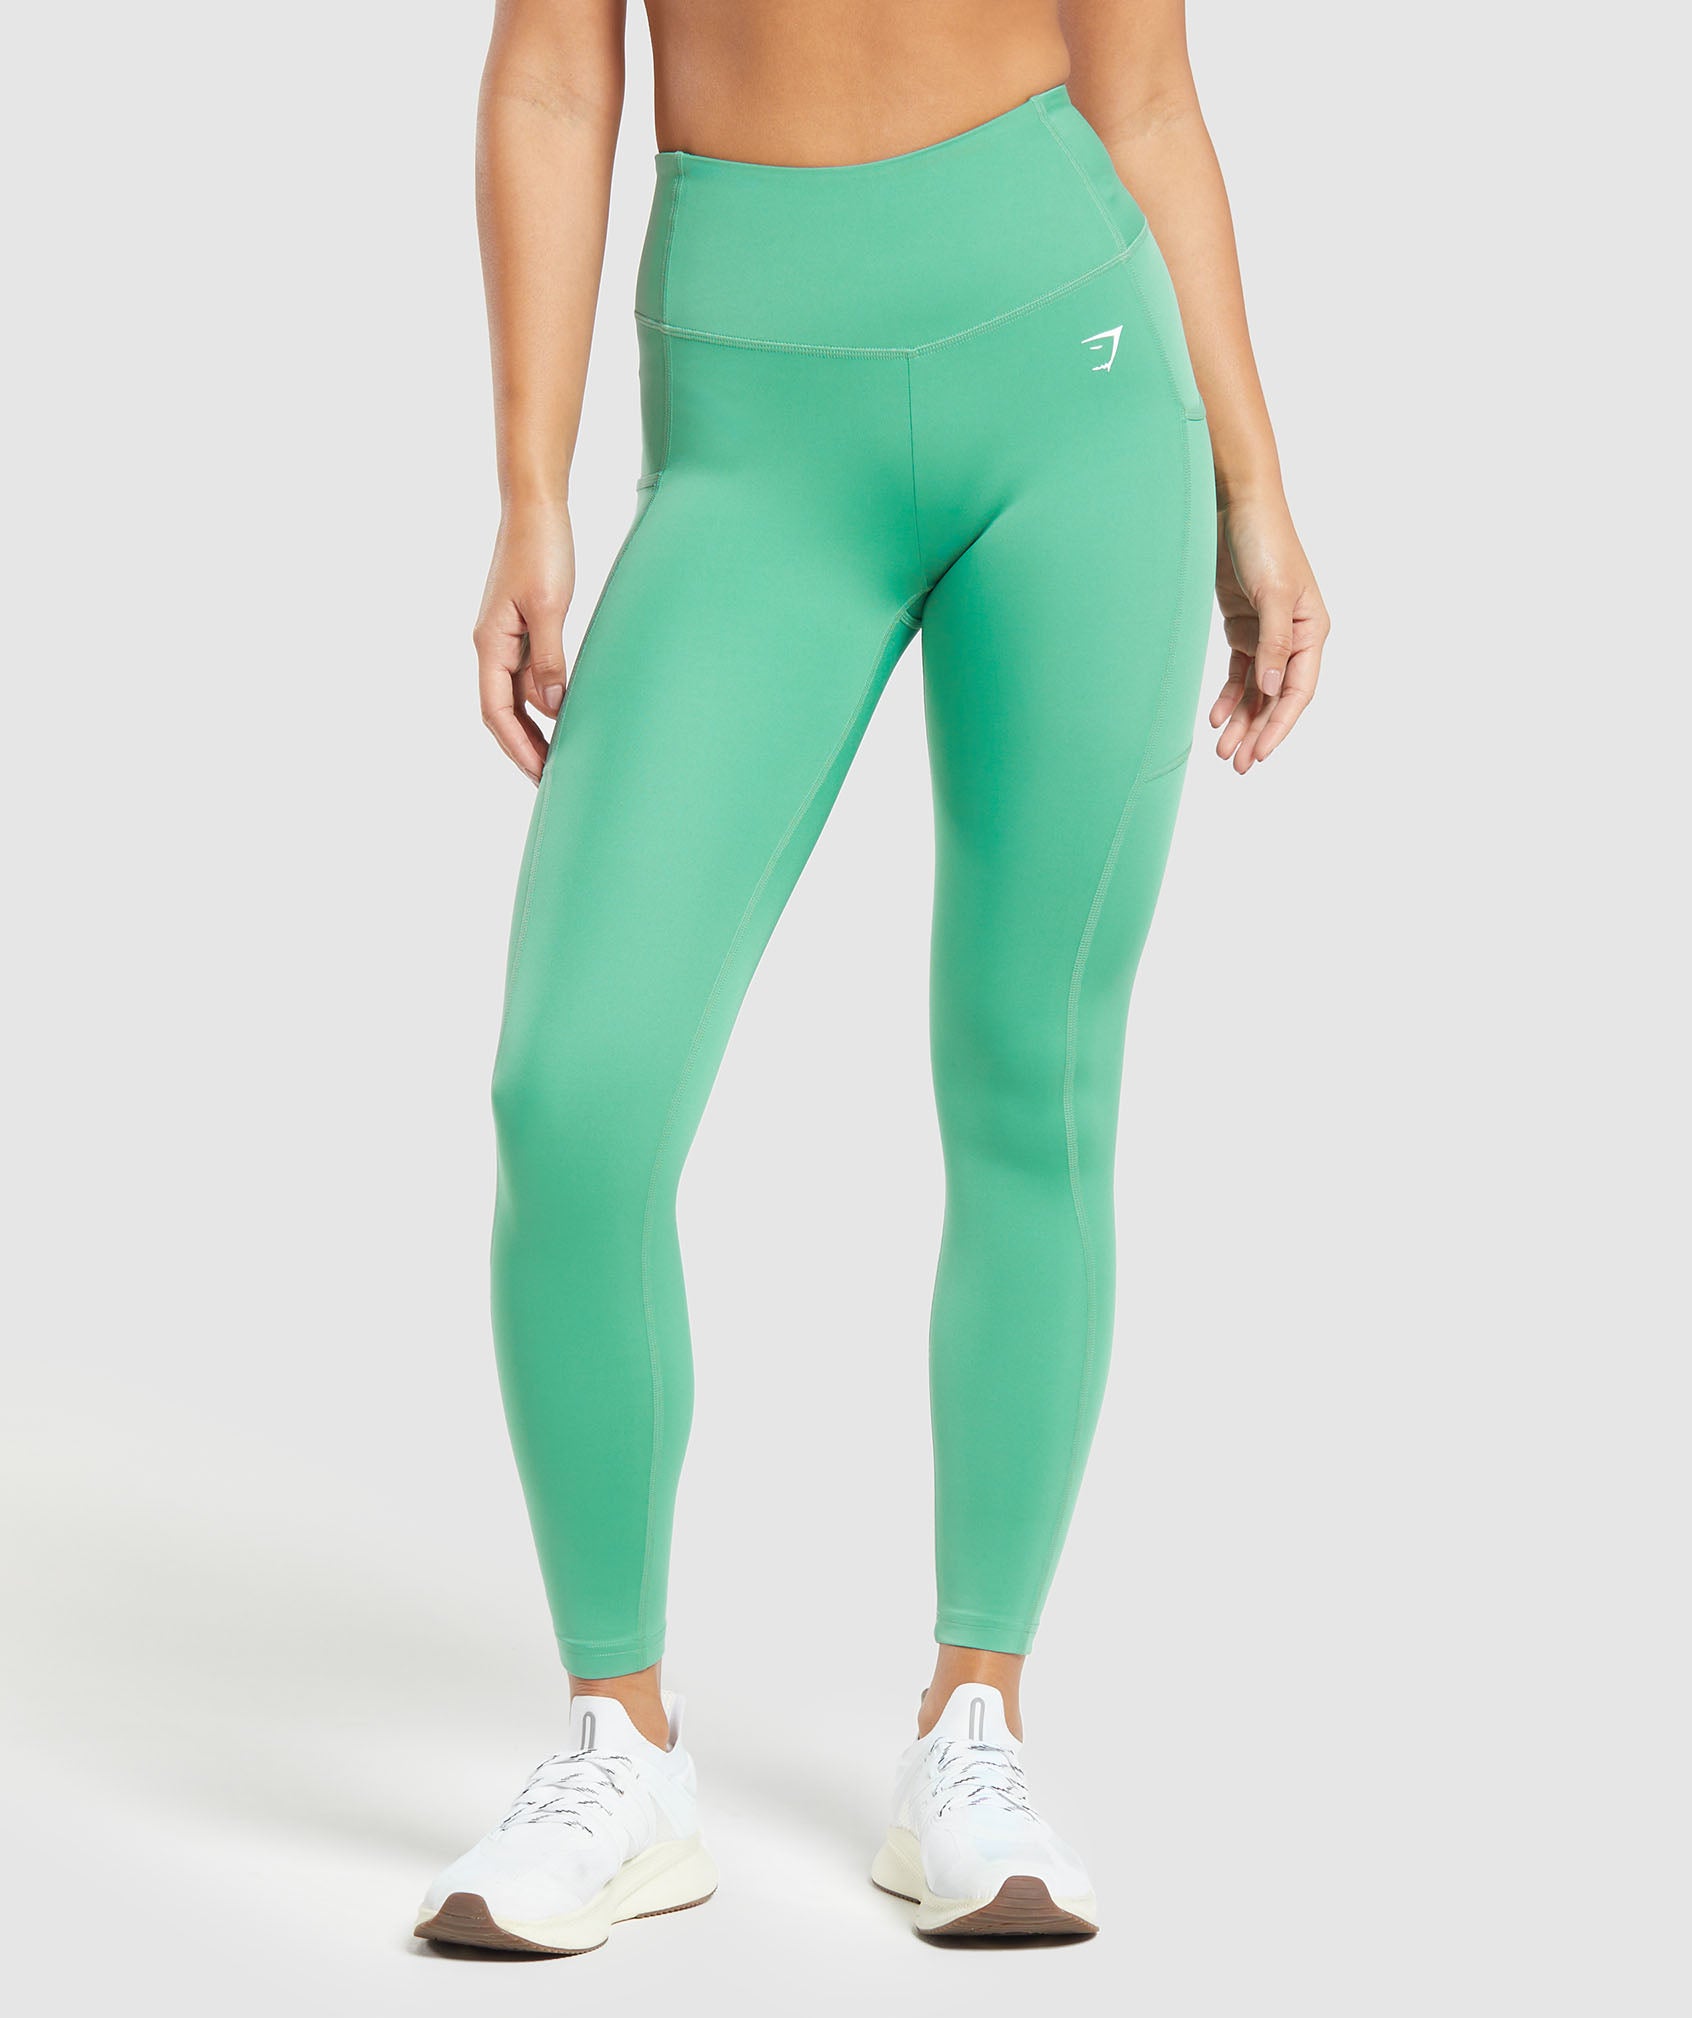 Gymshark Womens Gray Fit Seamless Leggings With Green Waistband